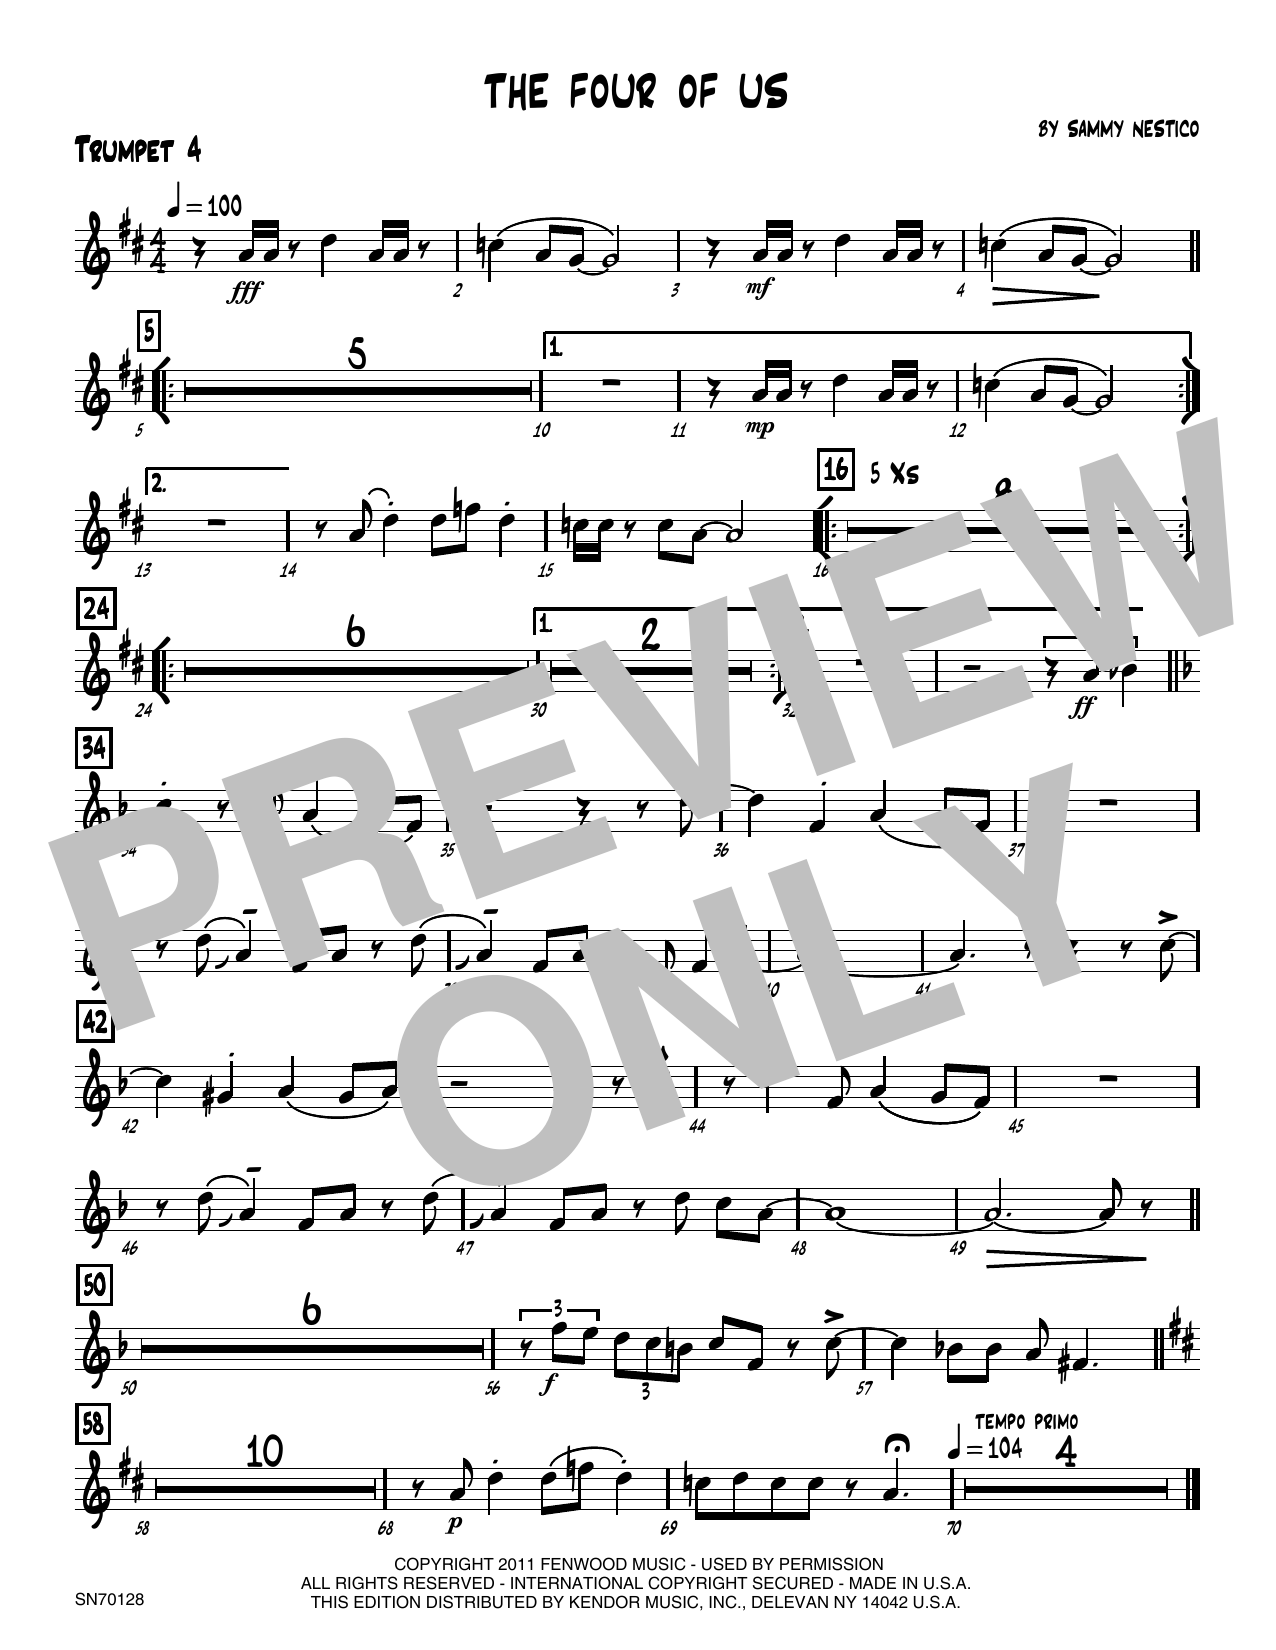 Download Sammy Nestico The Four Of Us - 4th Bb Trumpet Sheet Music